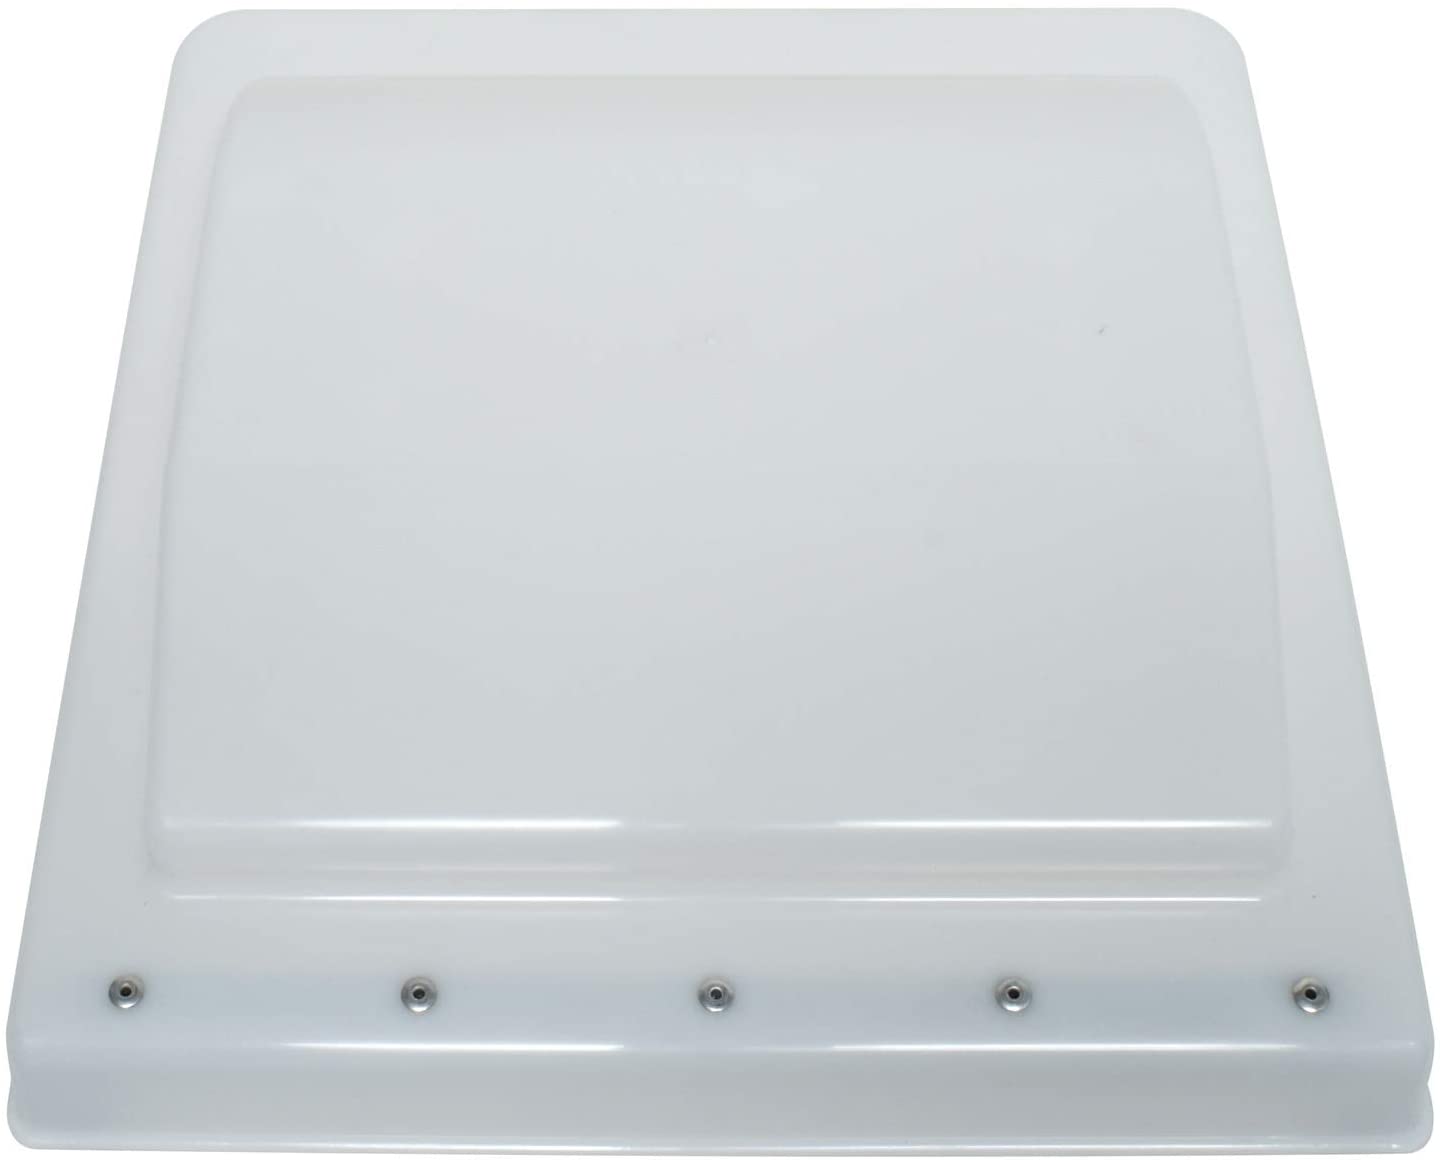 Universal Replacement Vent Lid for Pop-up Campers - 16 Inch x 15 Inch x 3.5 Inch - White